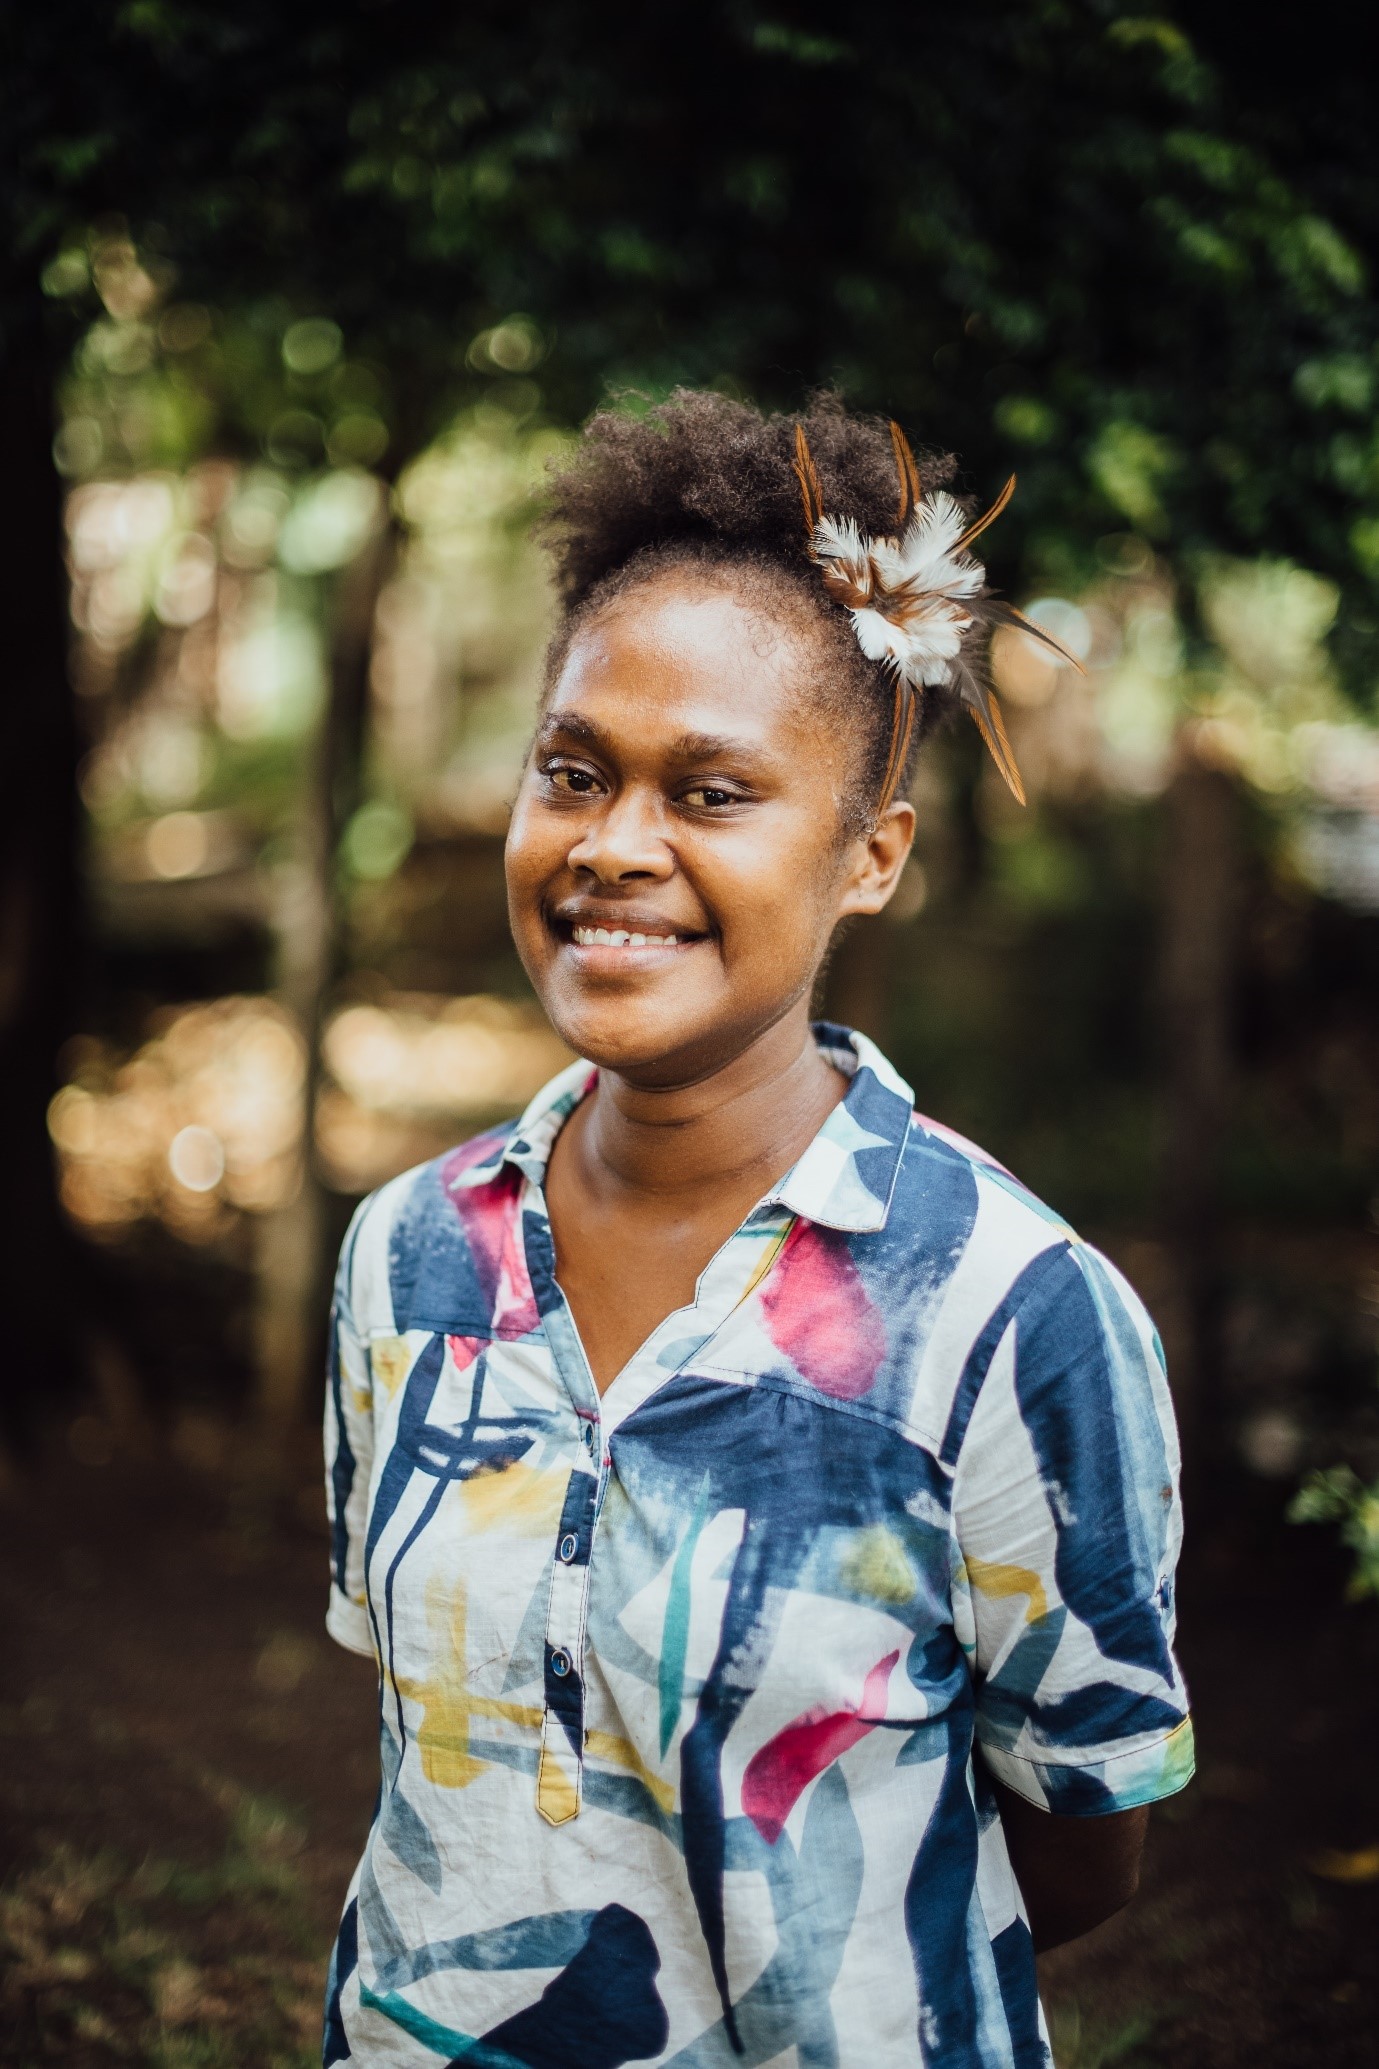 Leilani Vatu never went to a baking school. She learned to bake and decorate wedding and birthday cakes by watching videos on social media, and gets her clients through her Facebook page.